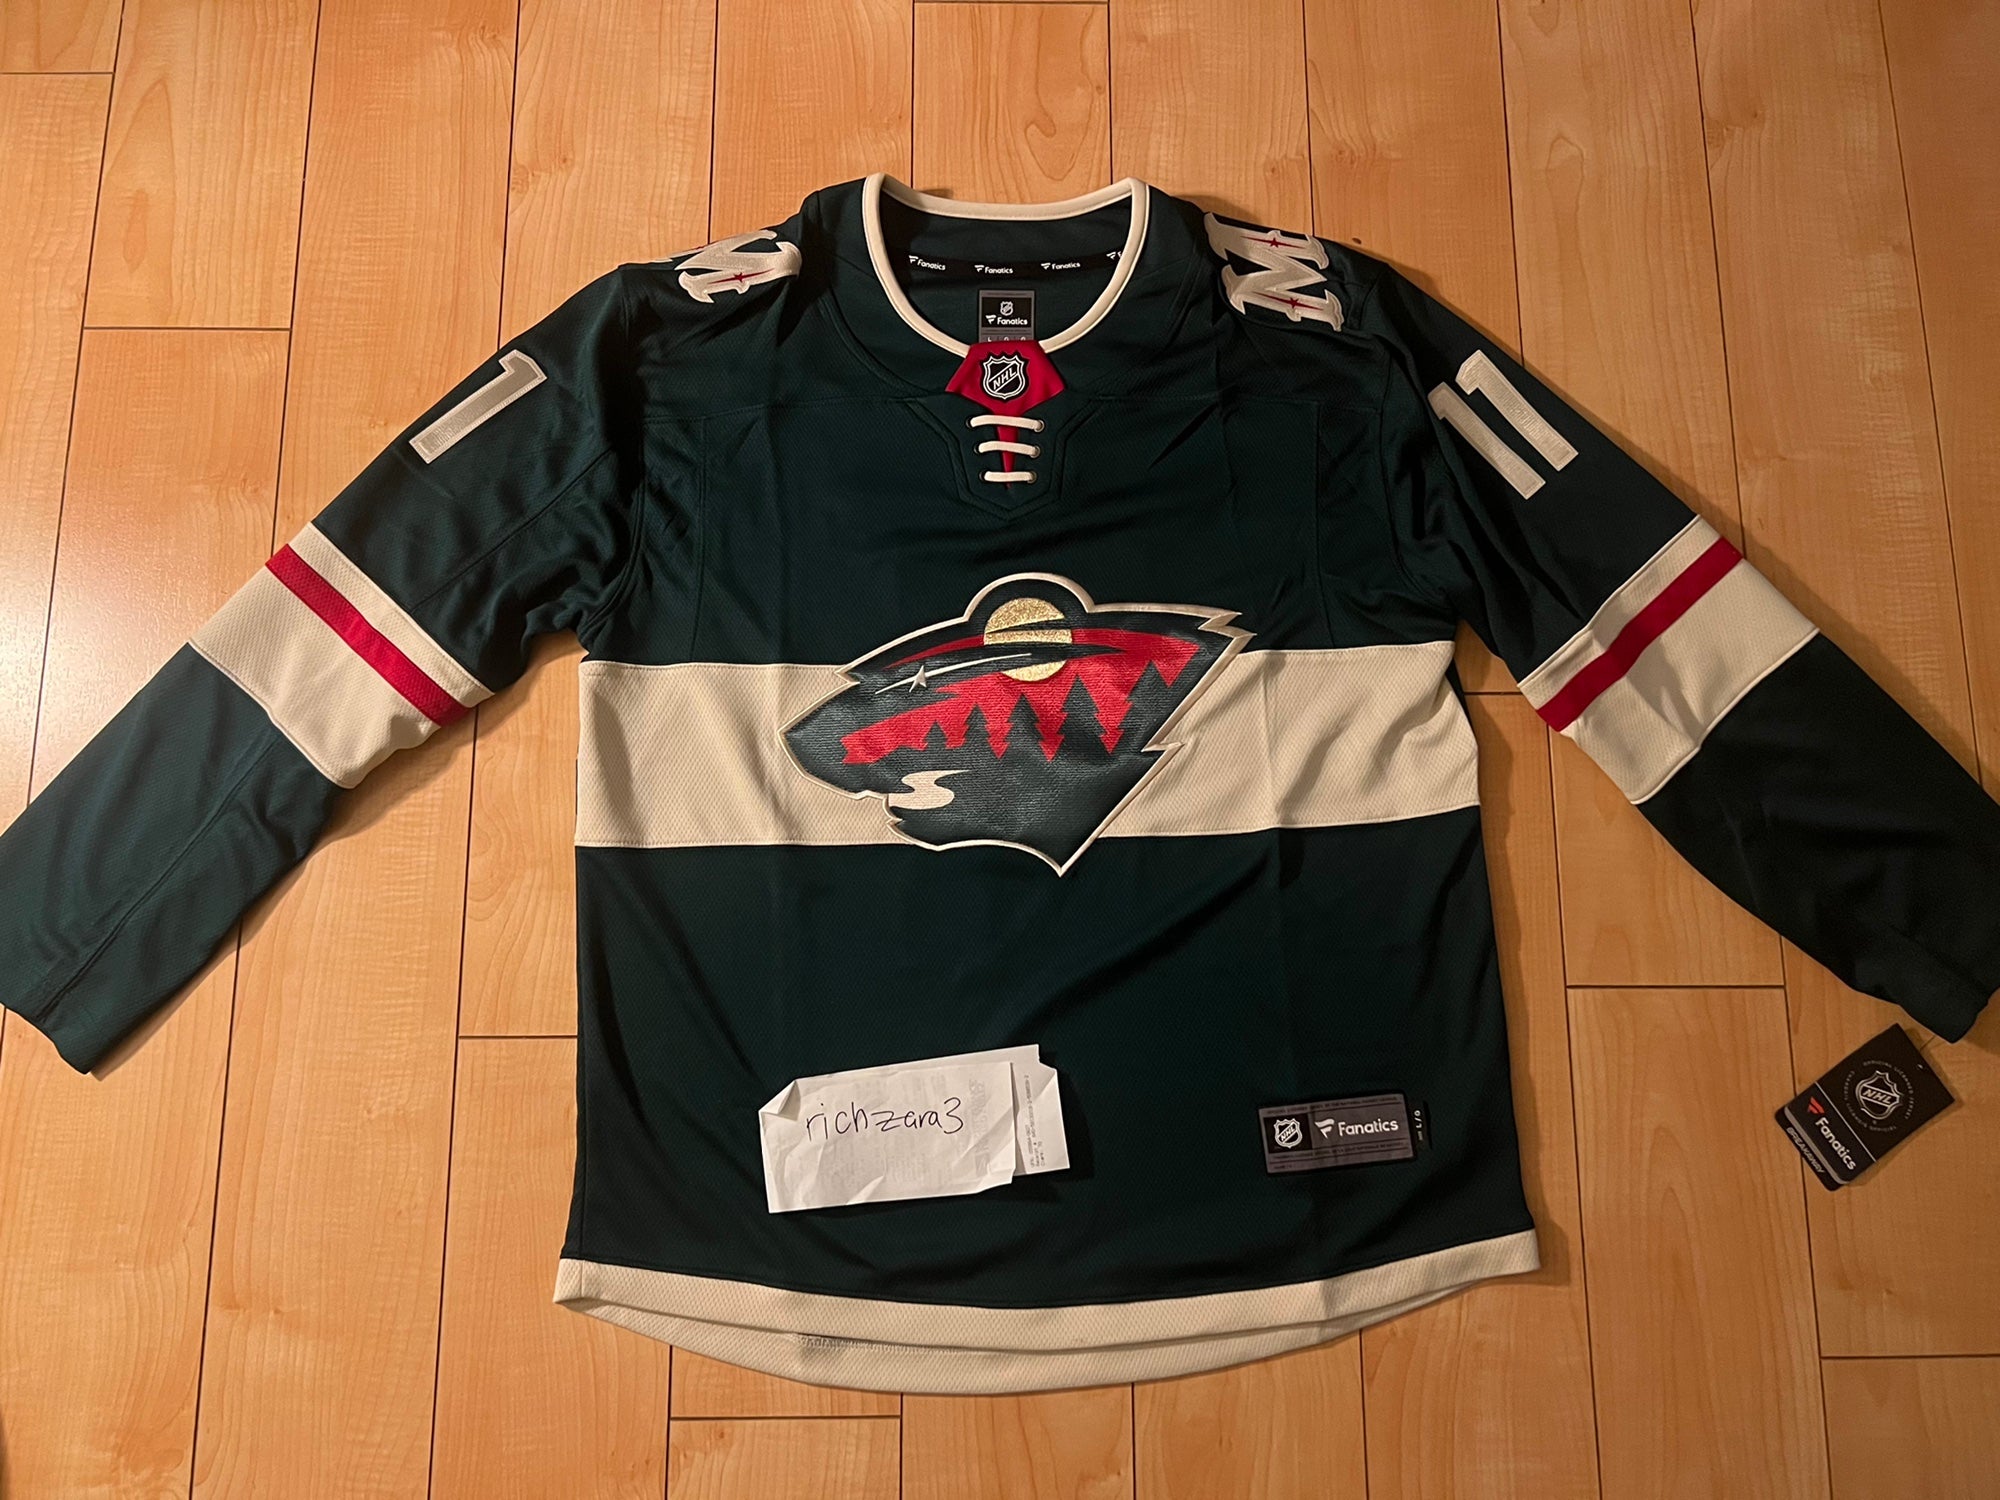 Minnesota Wild #11 Zach Parise Green Third Jersey on sale,for  Cheap,wholesale from China